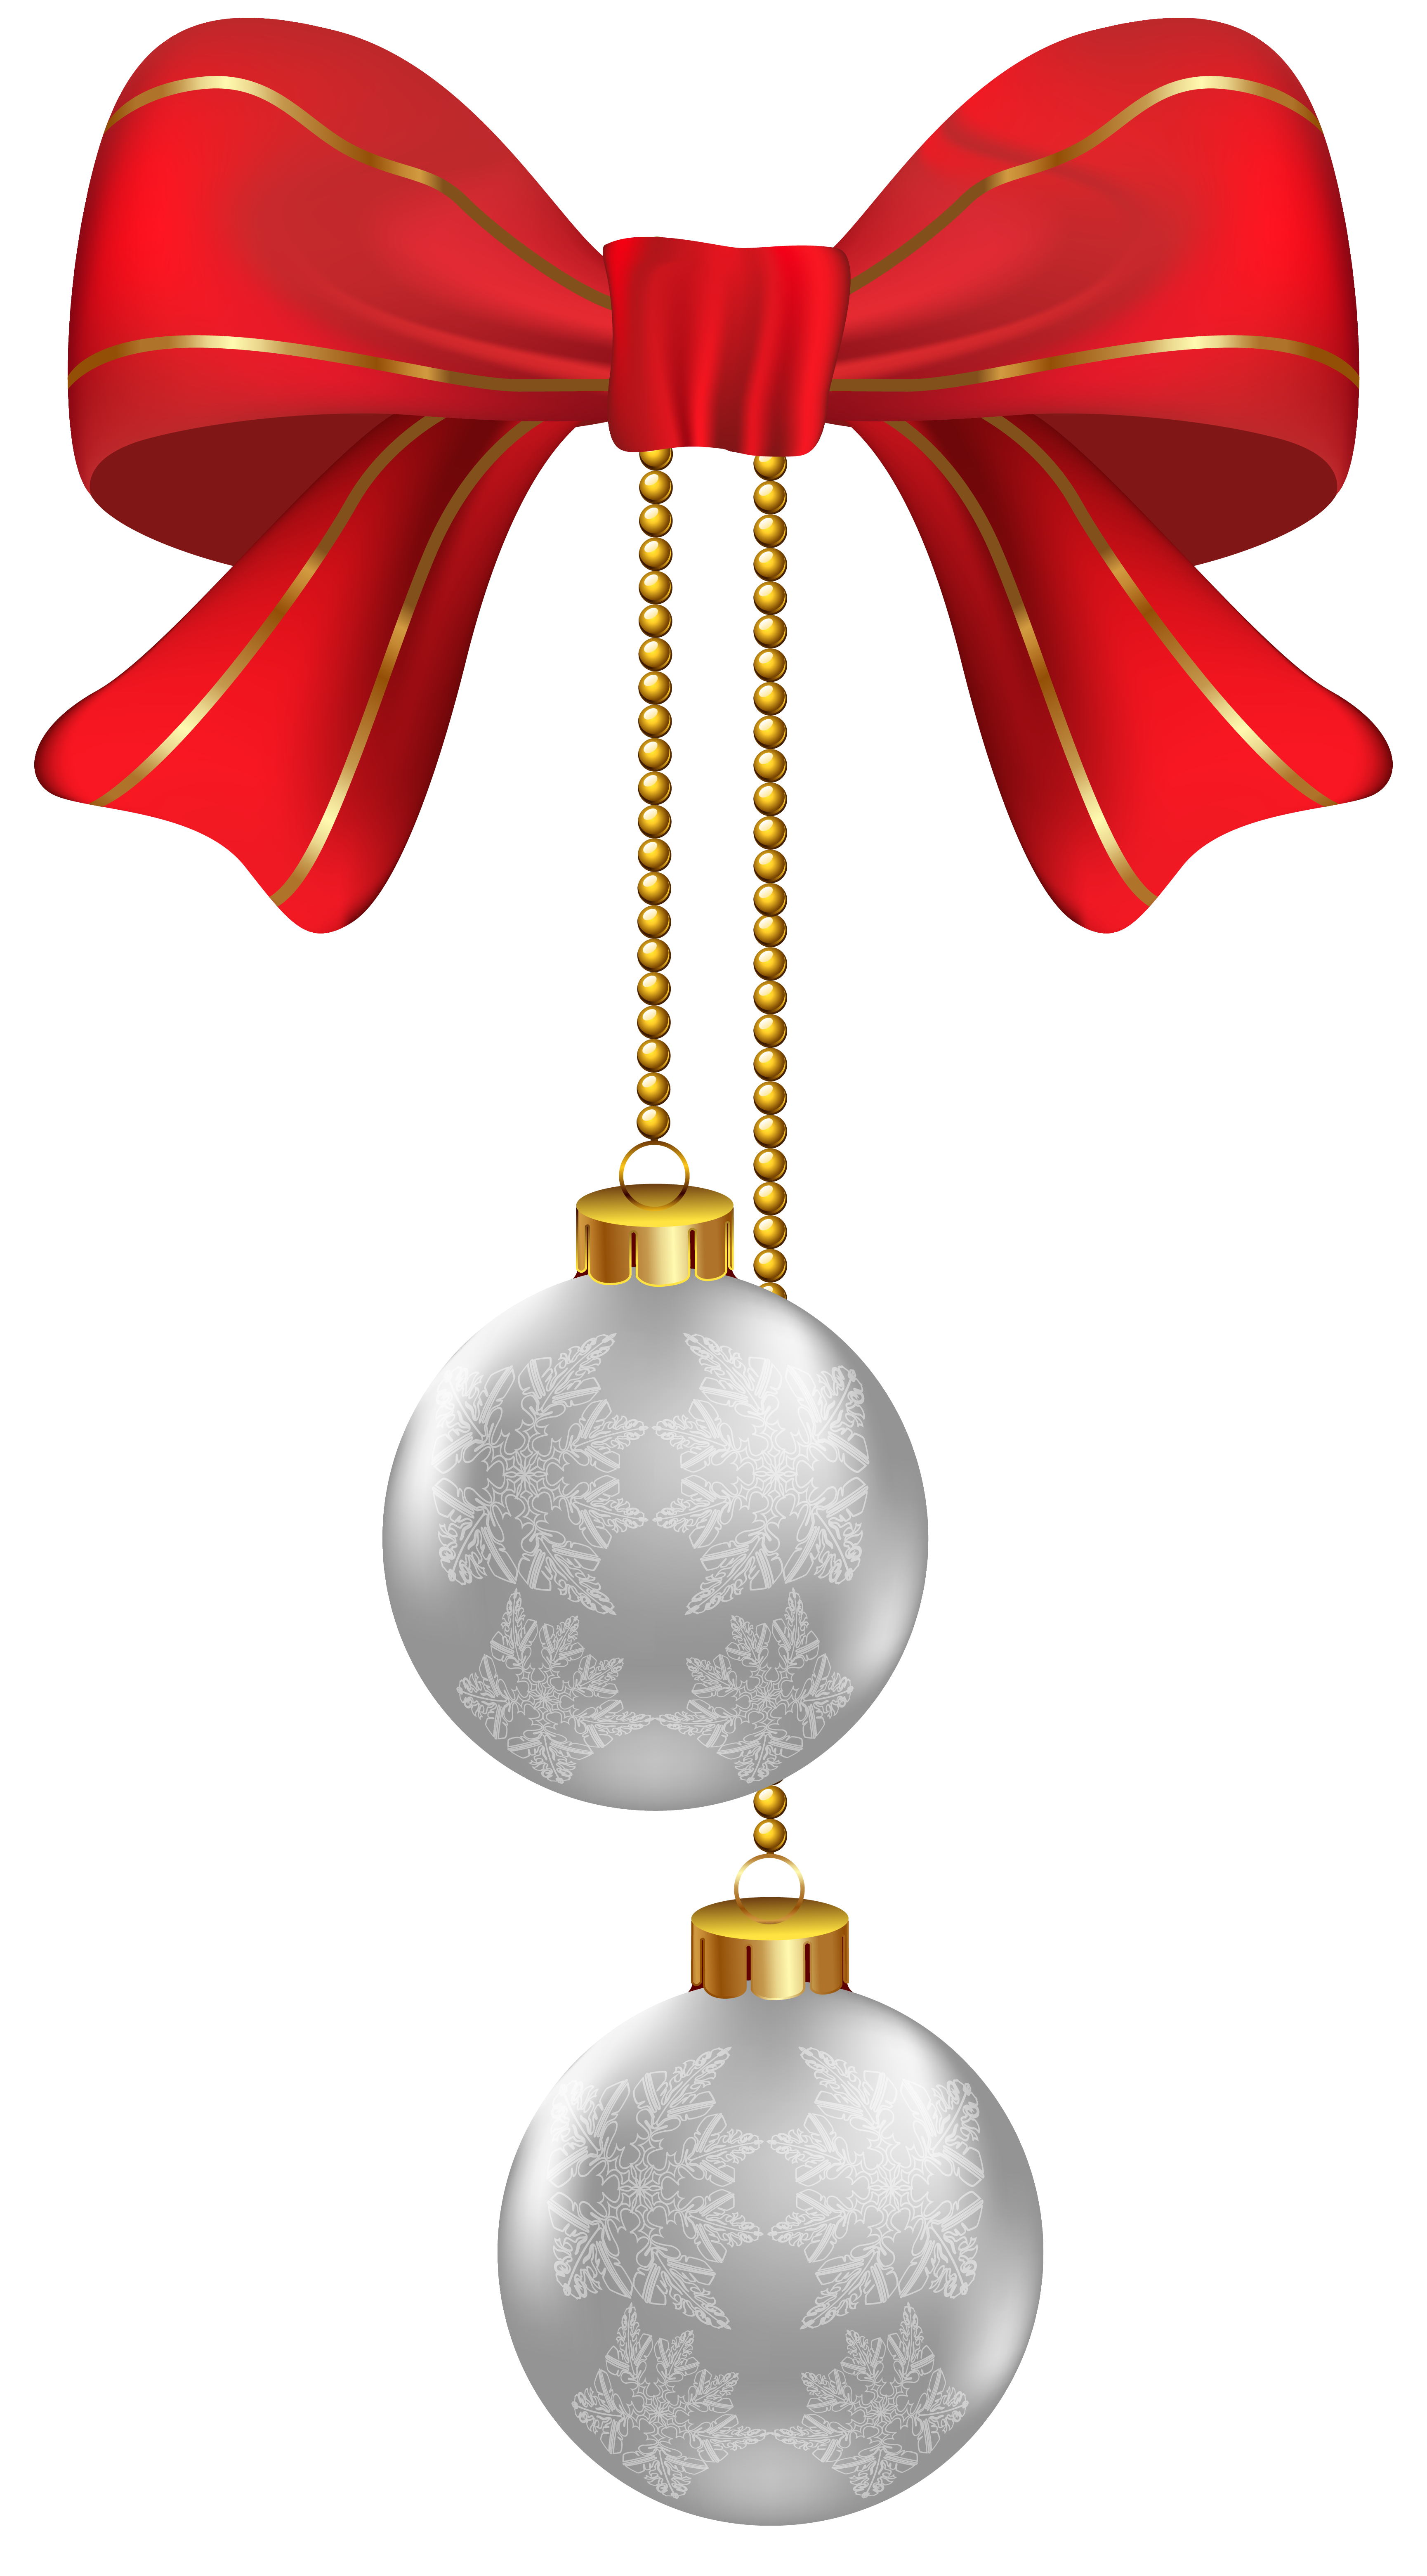 Clipart snowman decoration. Hanging christmas silver ornaments